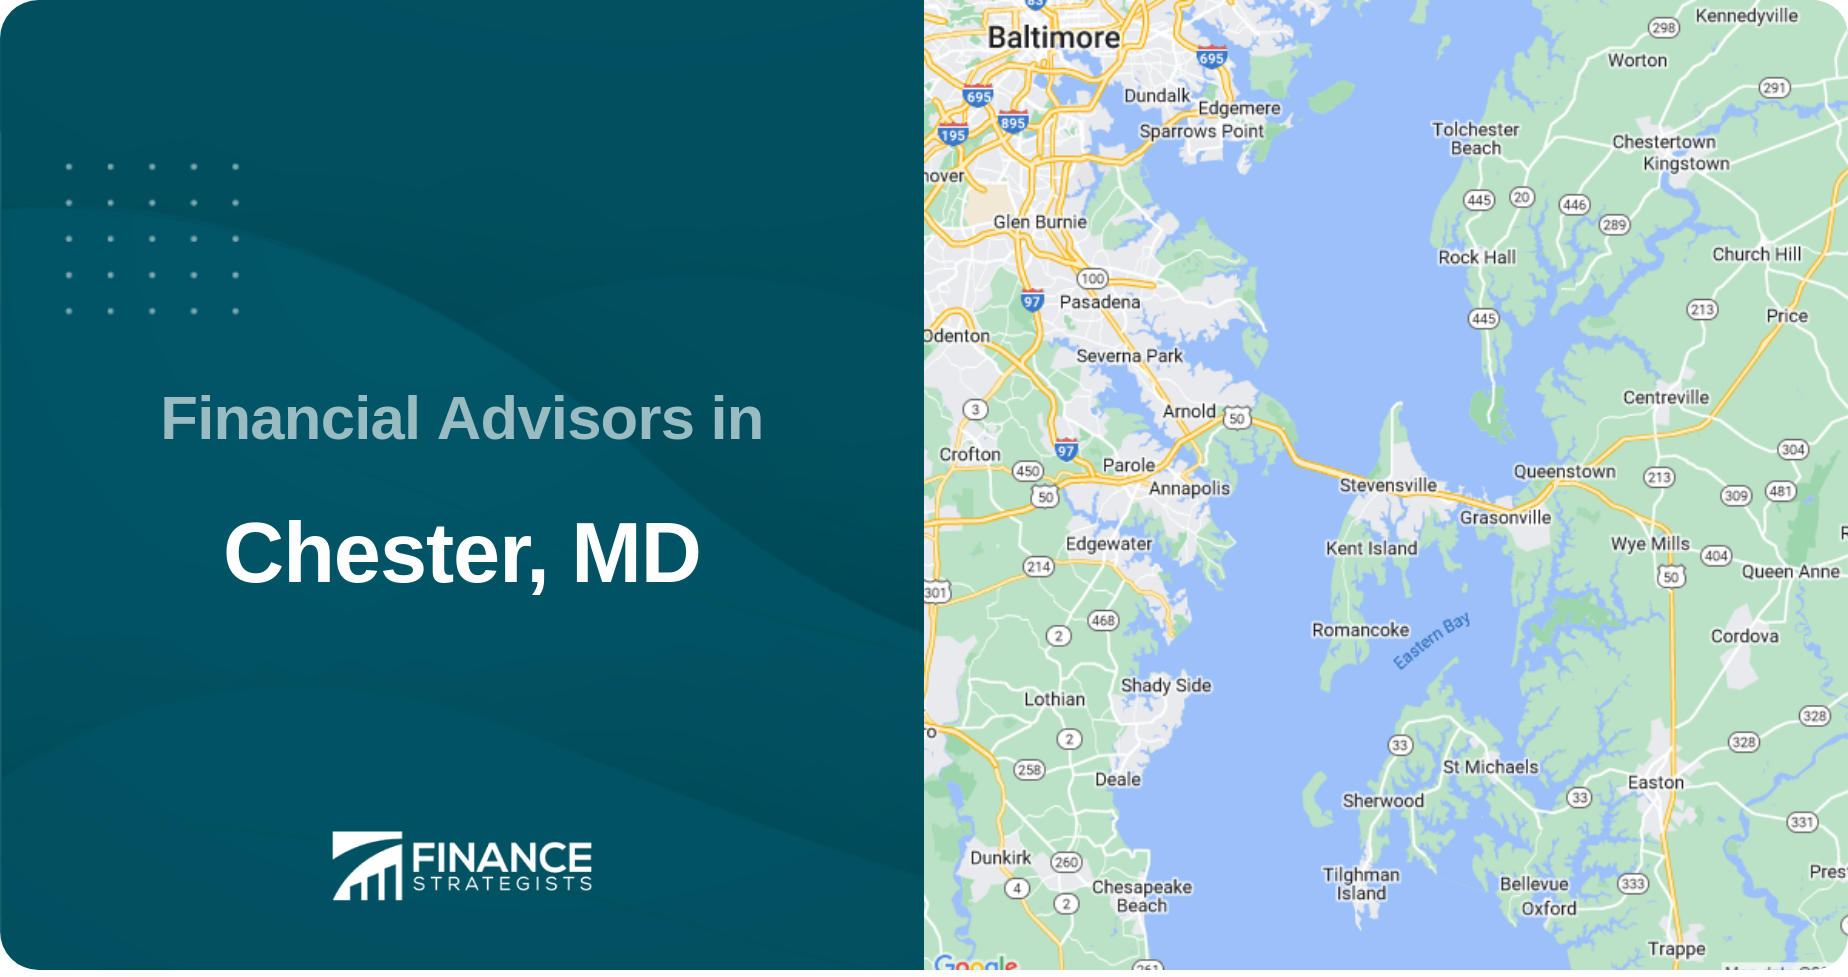 Financial Advisors in Chester, MD